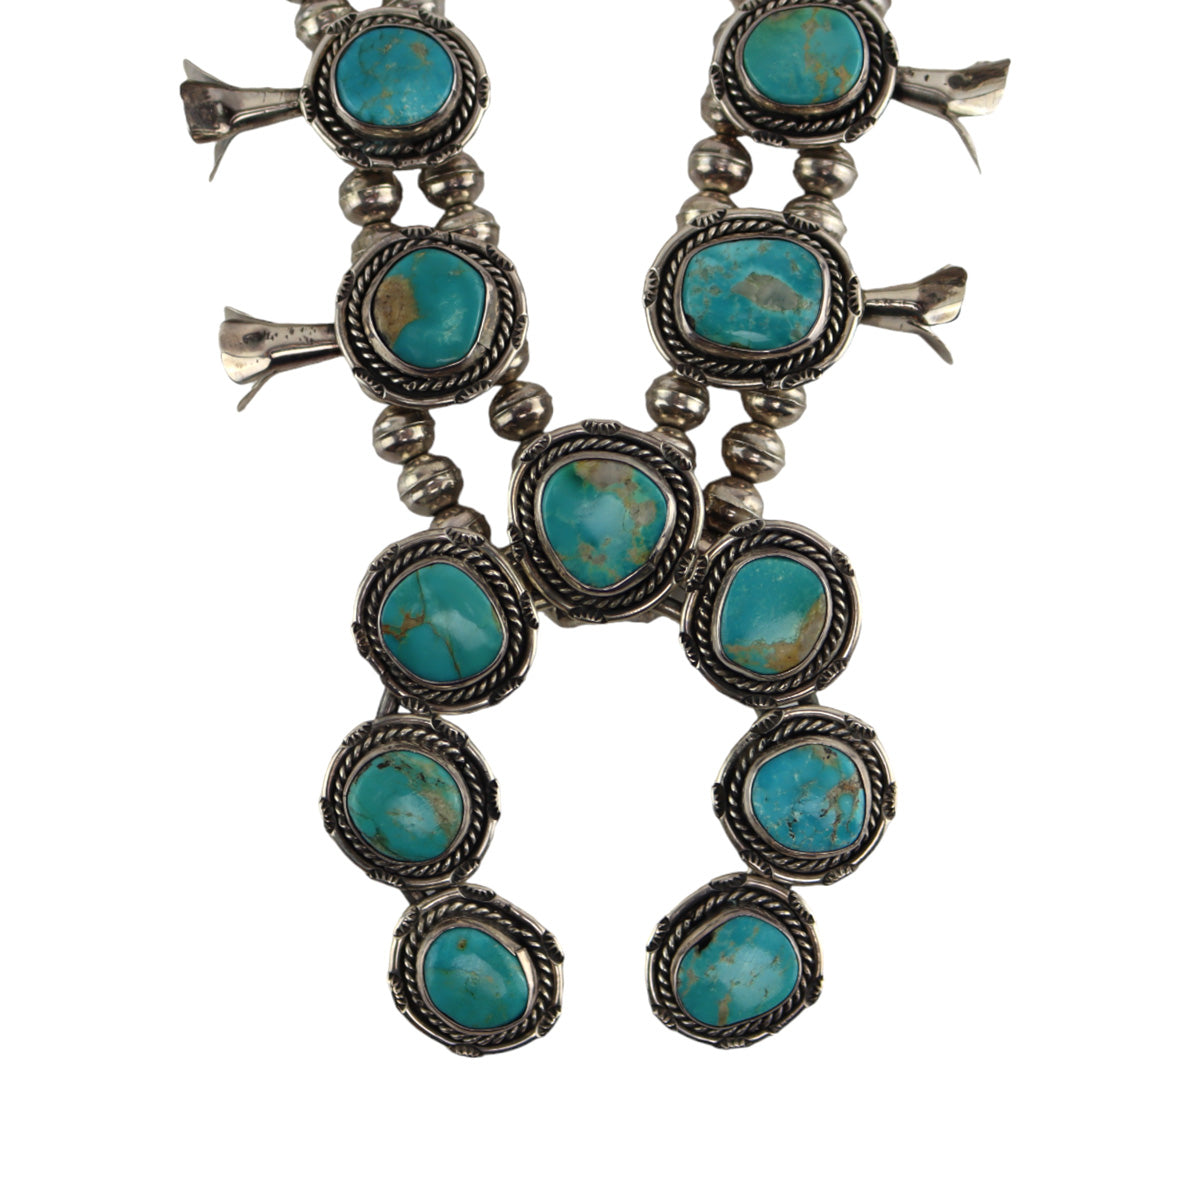 Navajo - Turquoise and Silver Squash Blossom Necklace c. 1960-70s, 24" length